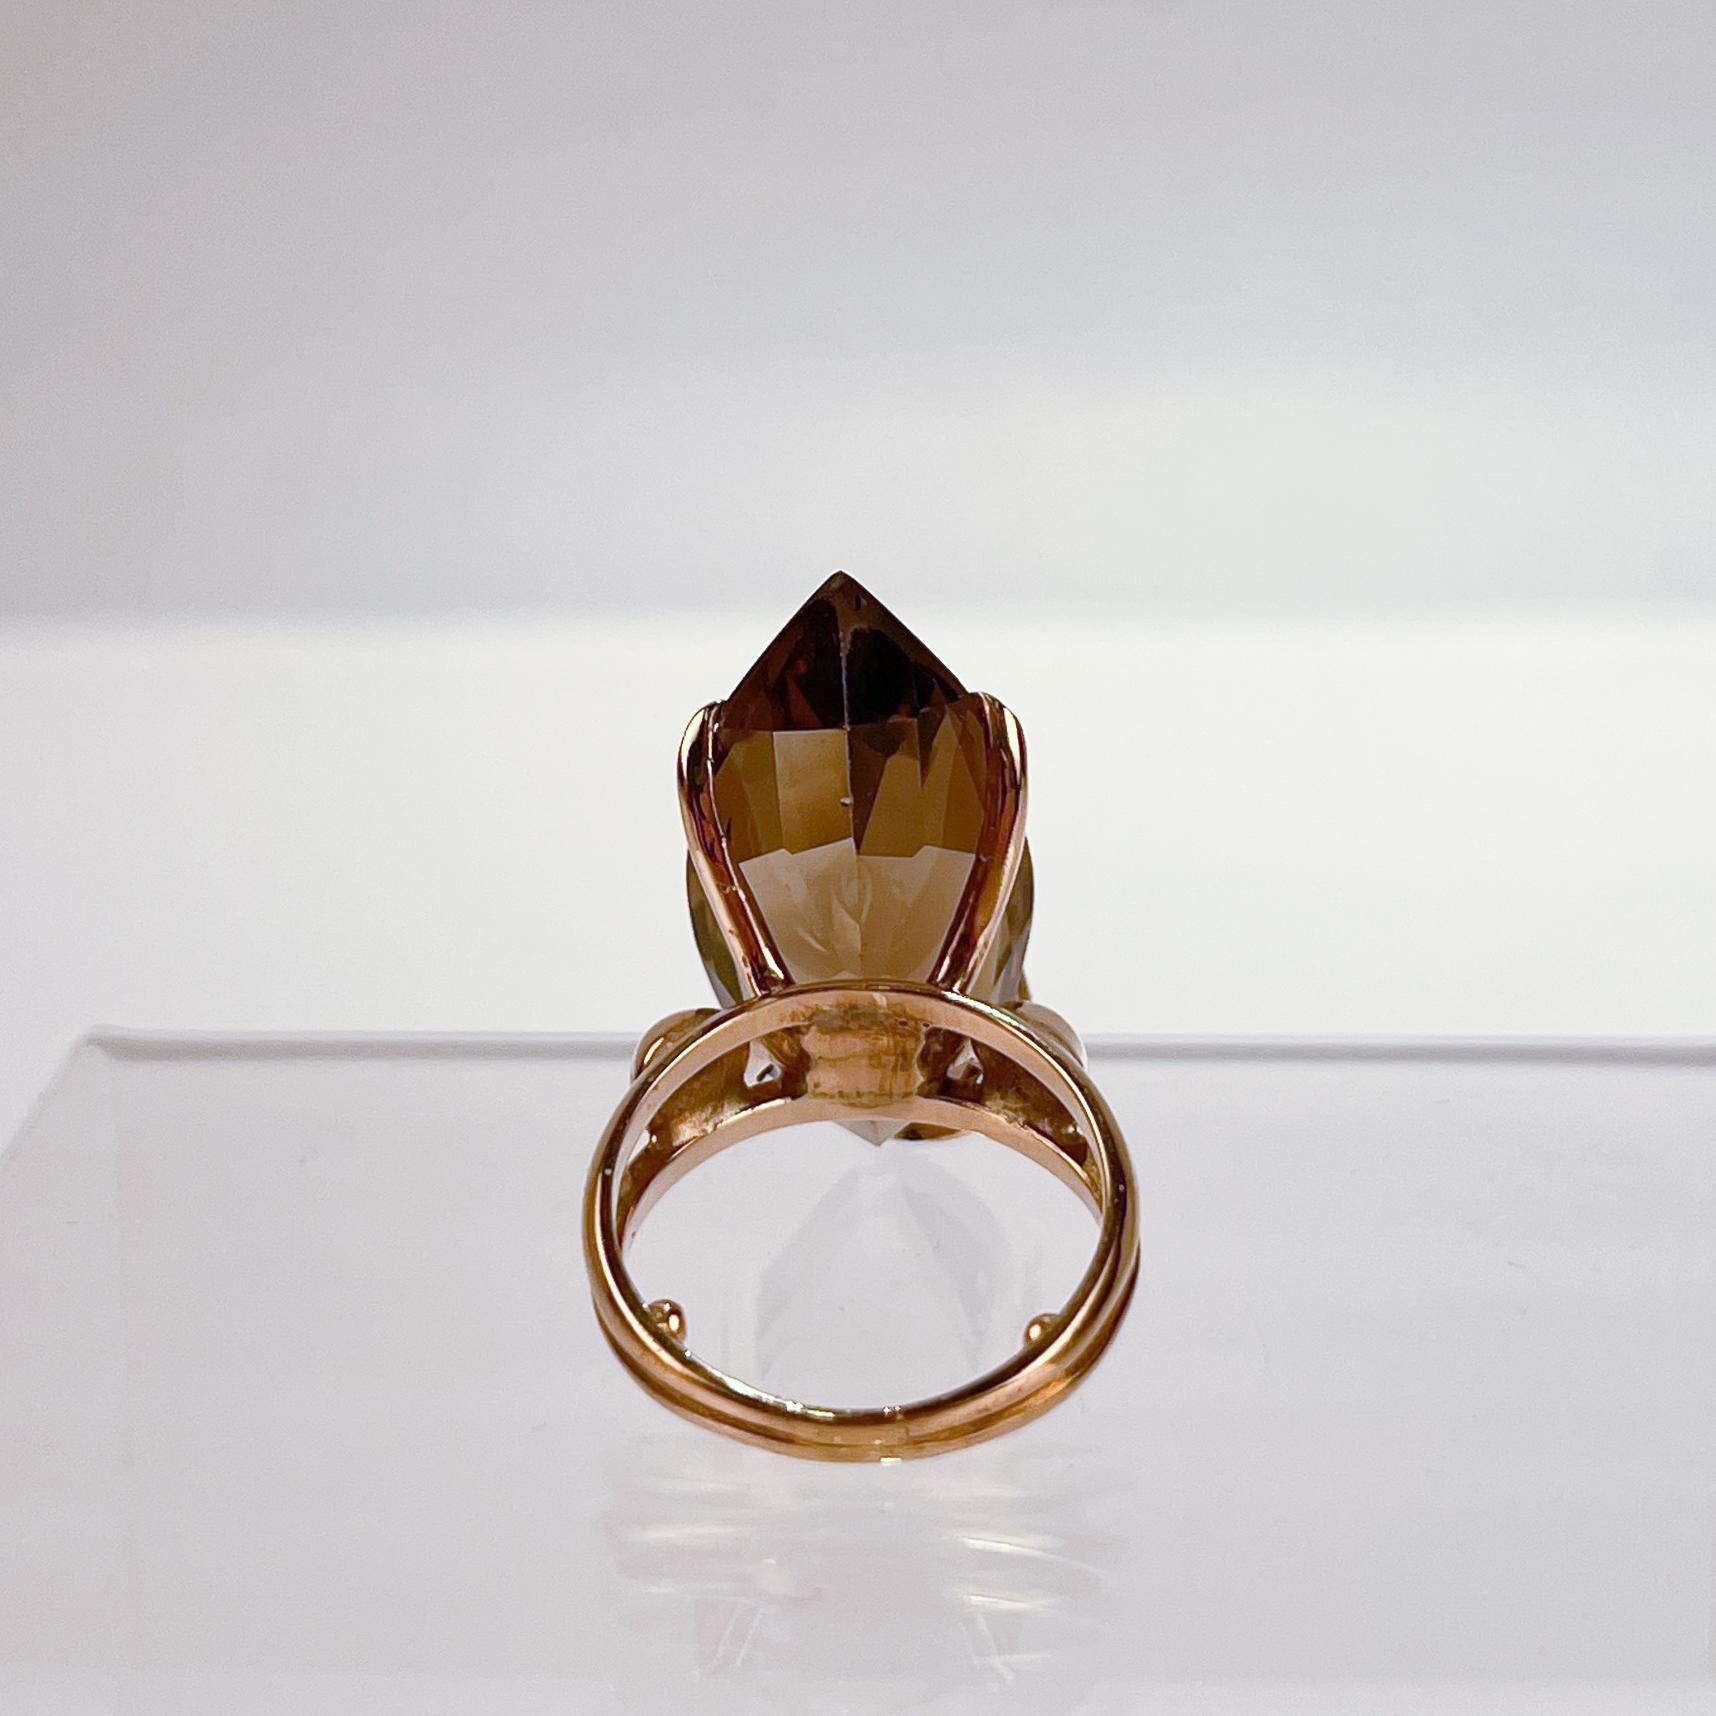 Modernist 14 Karat Gold and Smoky Quartz Cocktail Ring In Good Condition For Sale In Philadelphia, PA